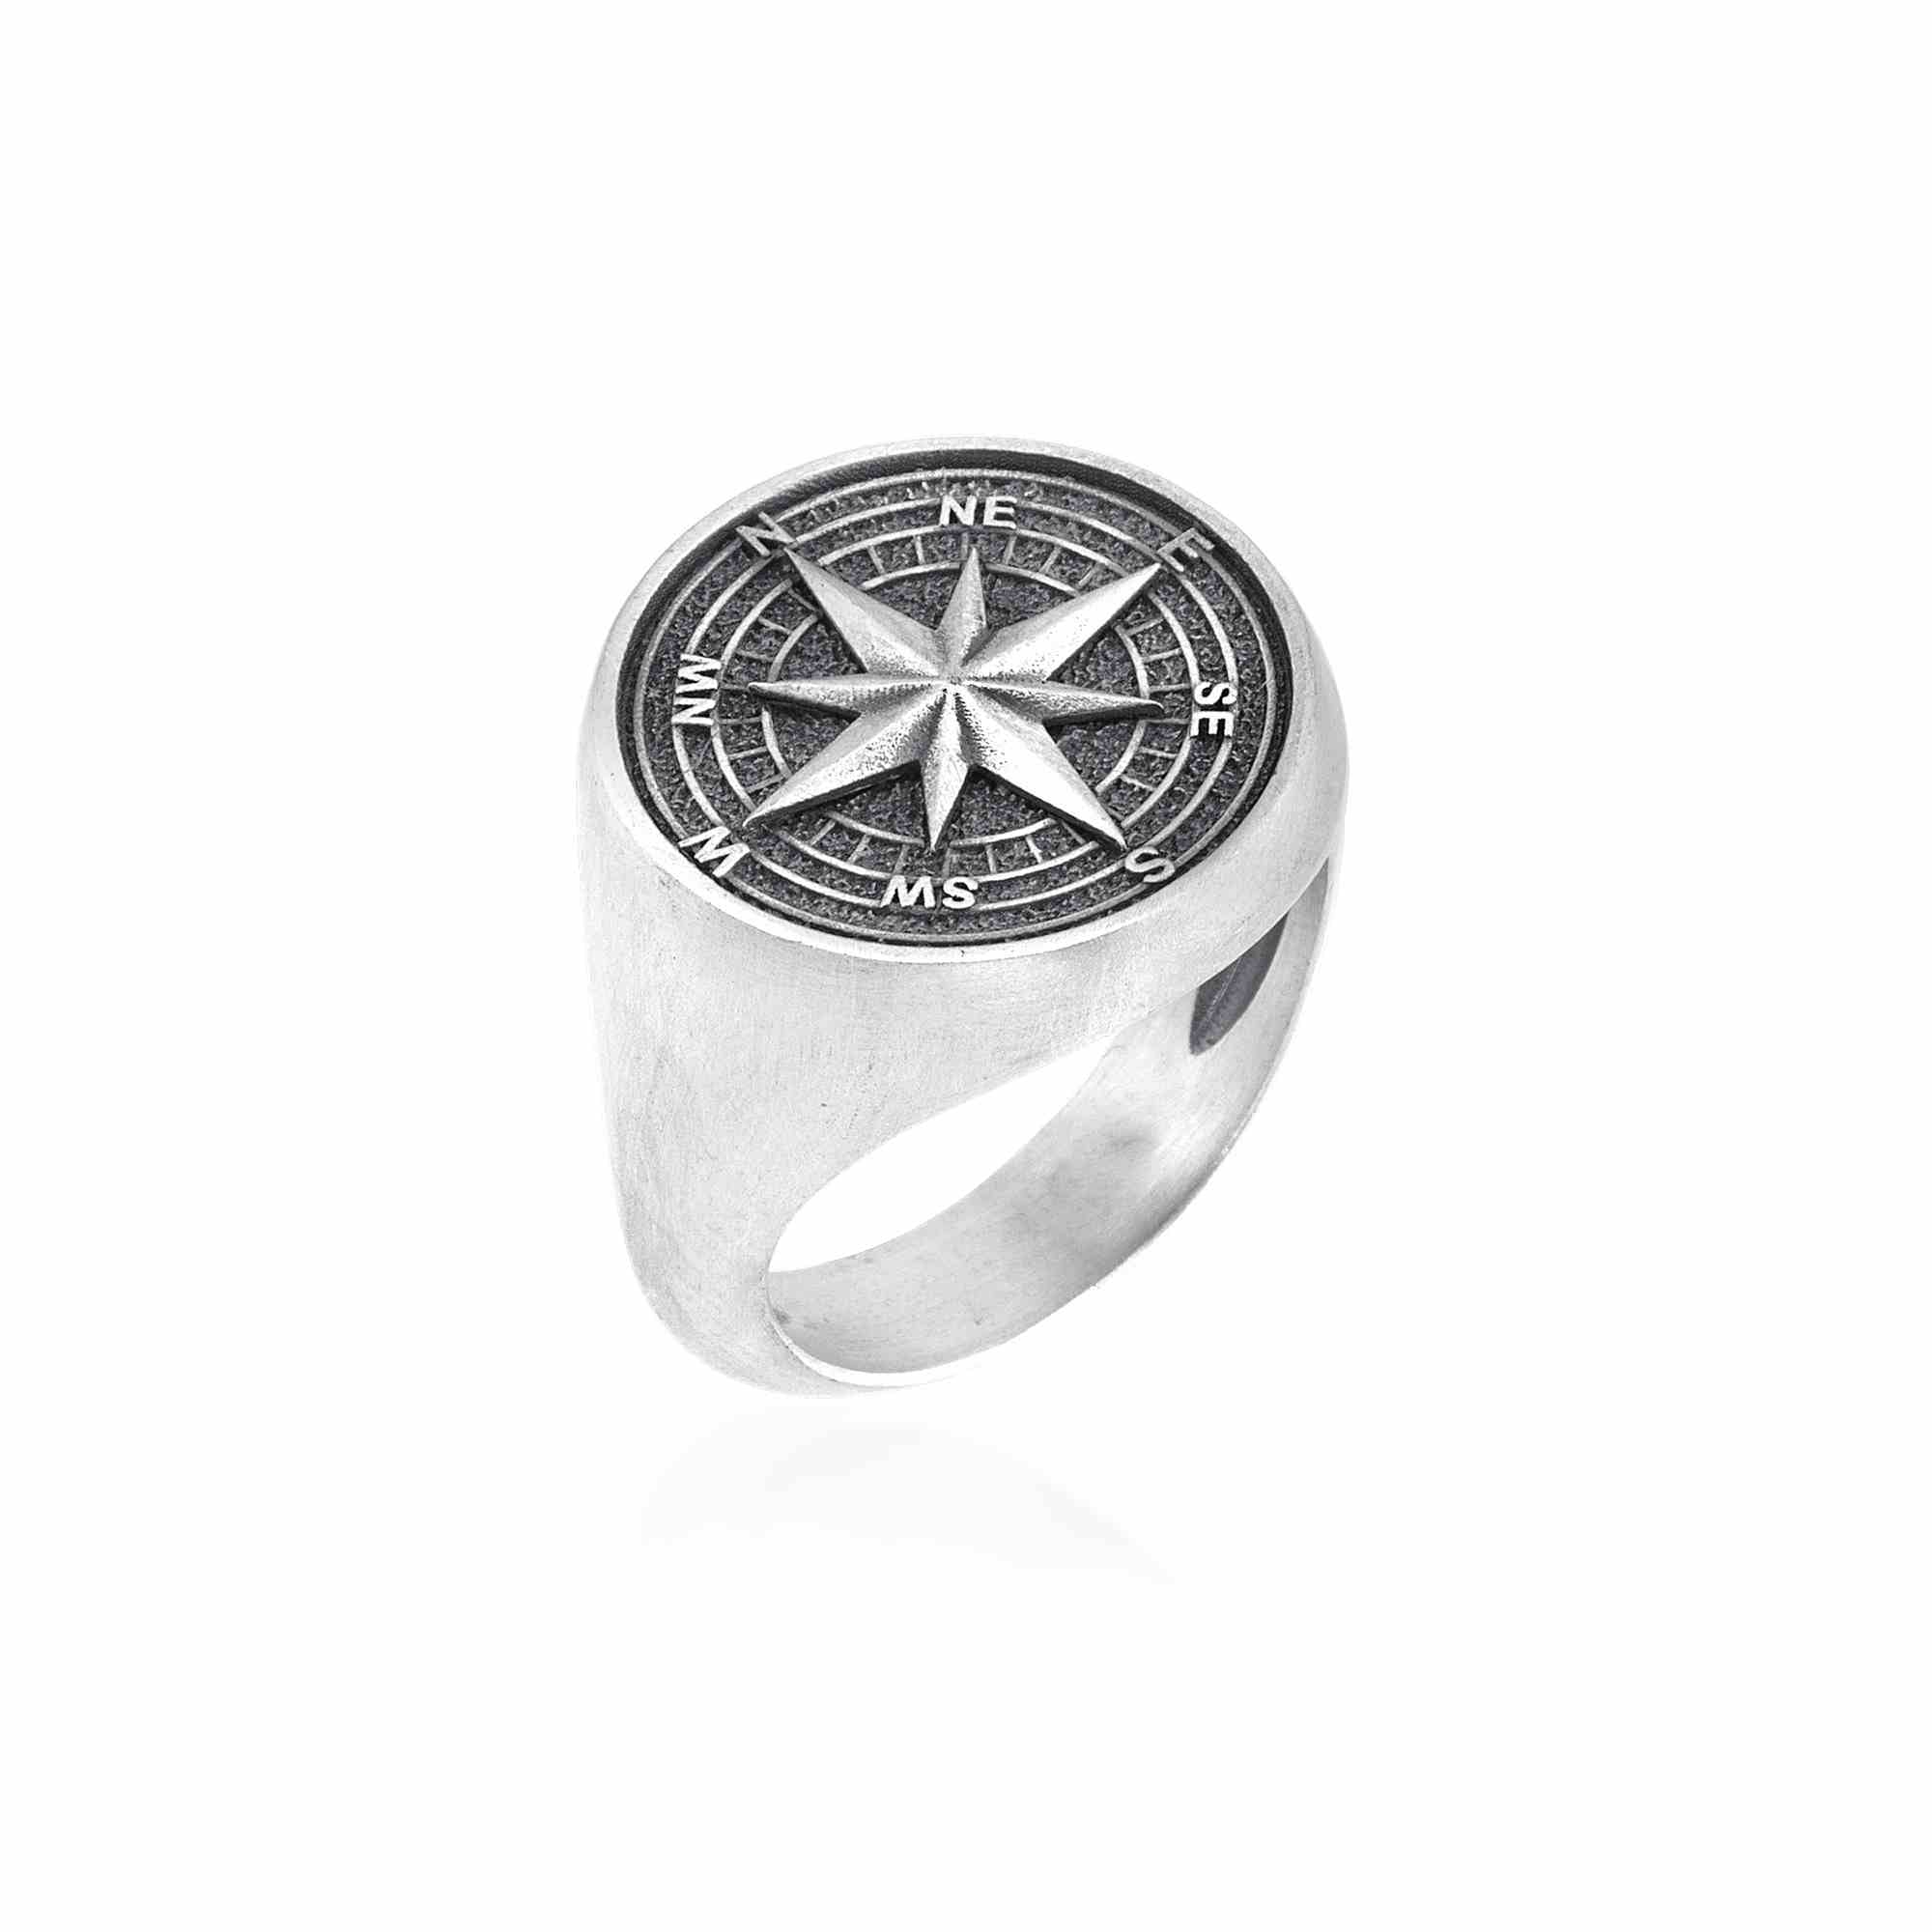 The Timeless Appeal of Men's Signet Rings: A Macro Perspective